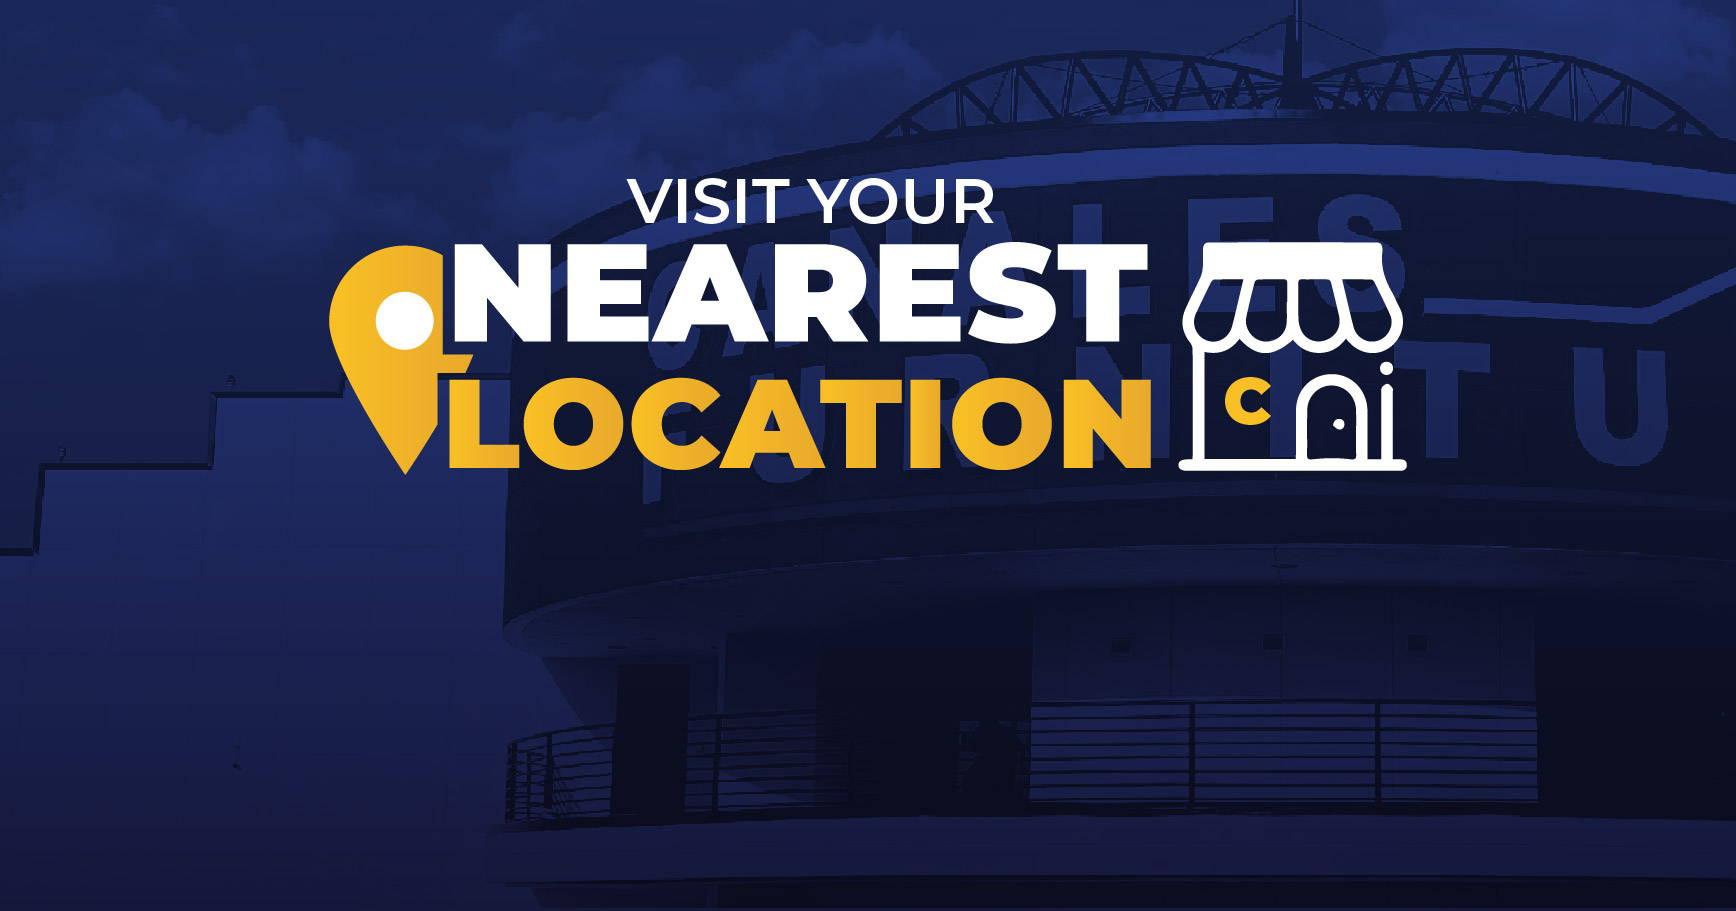 Visit your nearest location! Find a Canales Furniture store in Texas or Oklahoma near your area. Click on the "Find My Store" button to be directed to the stores page for more details.